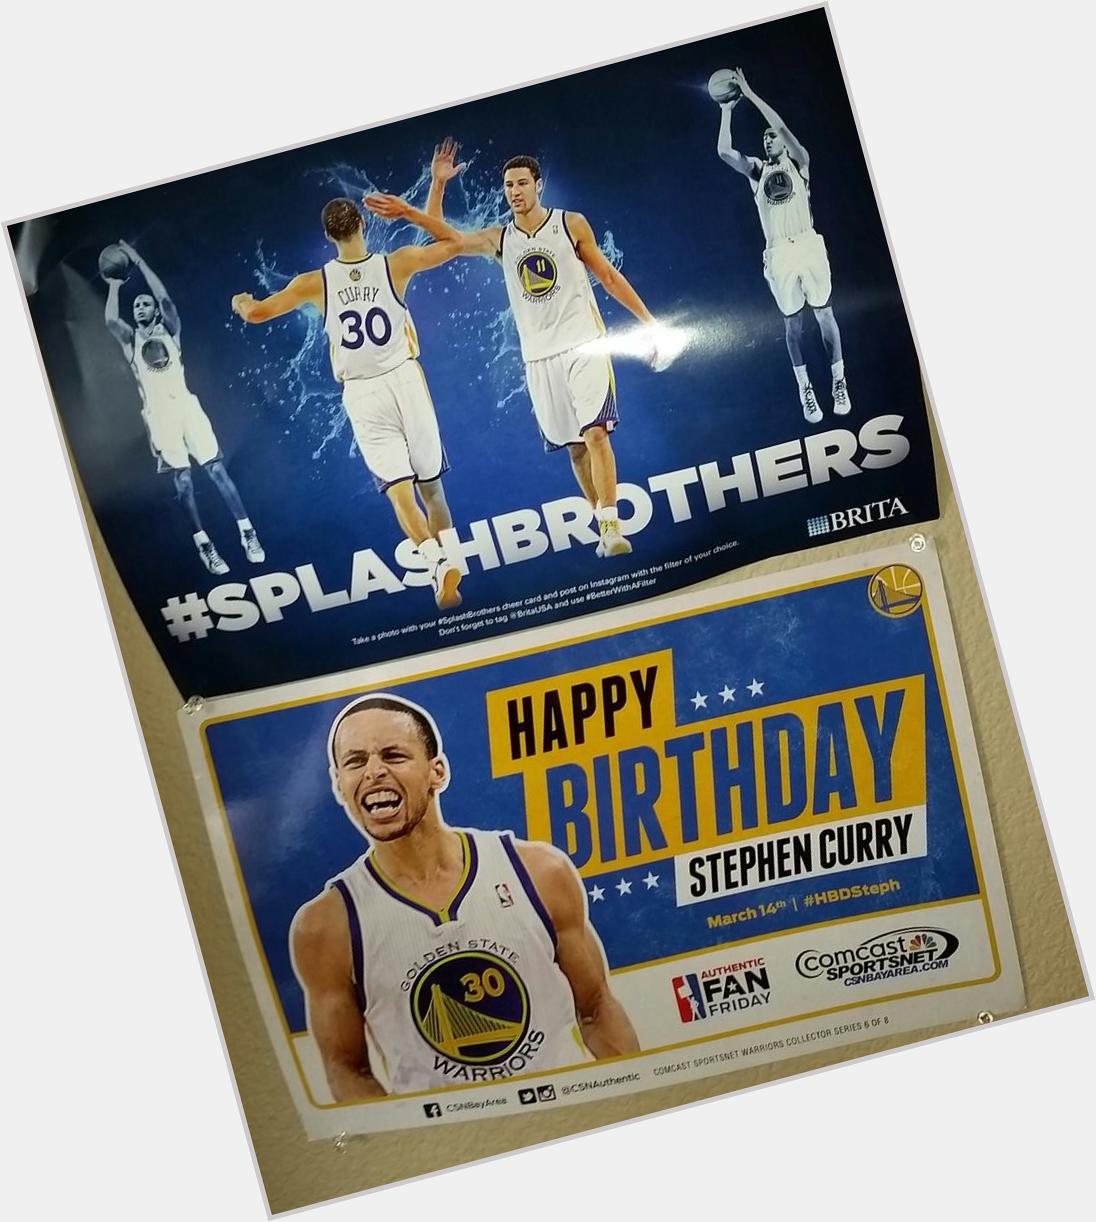 Happy Birthday Stephen Curry! We are blessed to get to watch you play. 